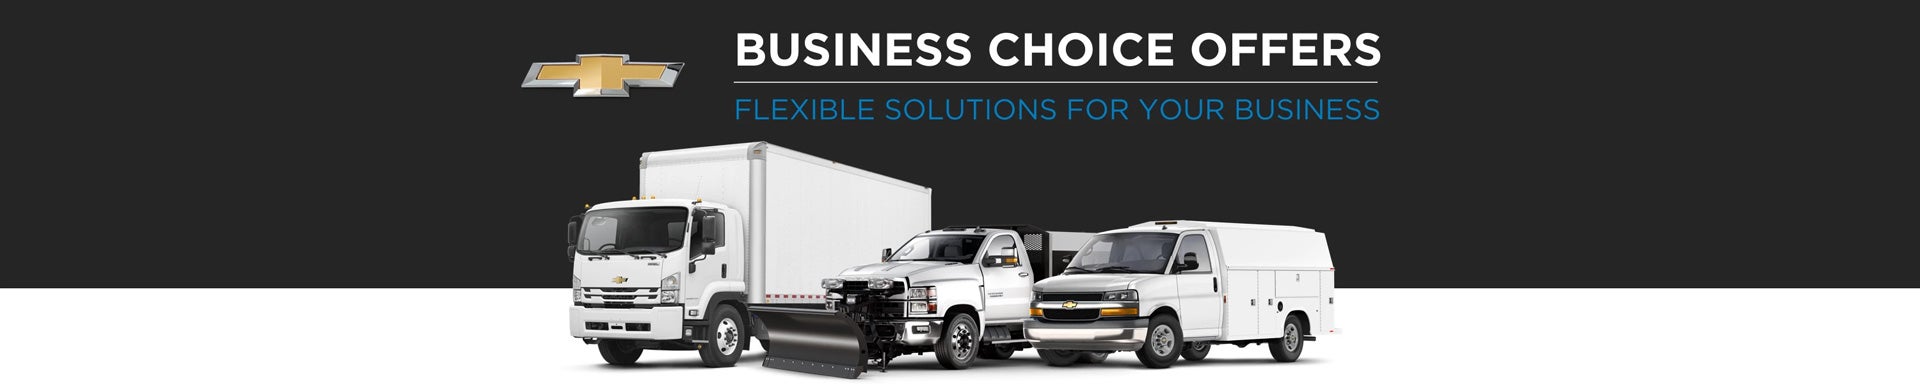 Chevrolet Business Choice Offers - Flexible Solutions for your Business - Lipscomb Chevrolet Buick GMC in Bowie TX